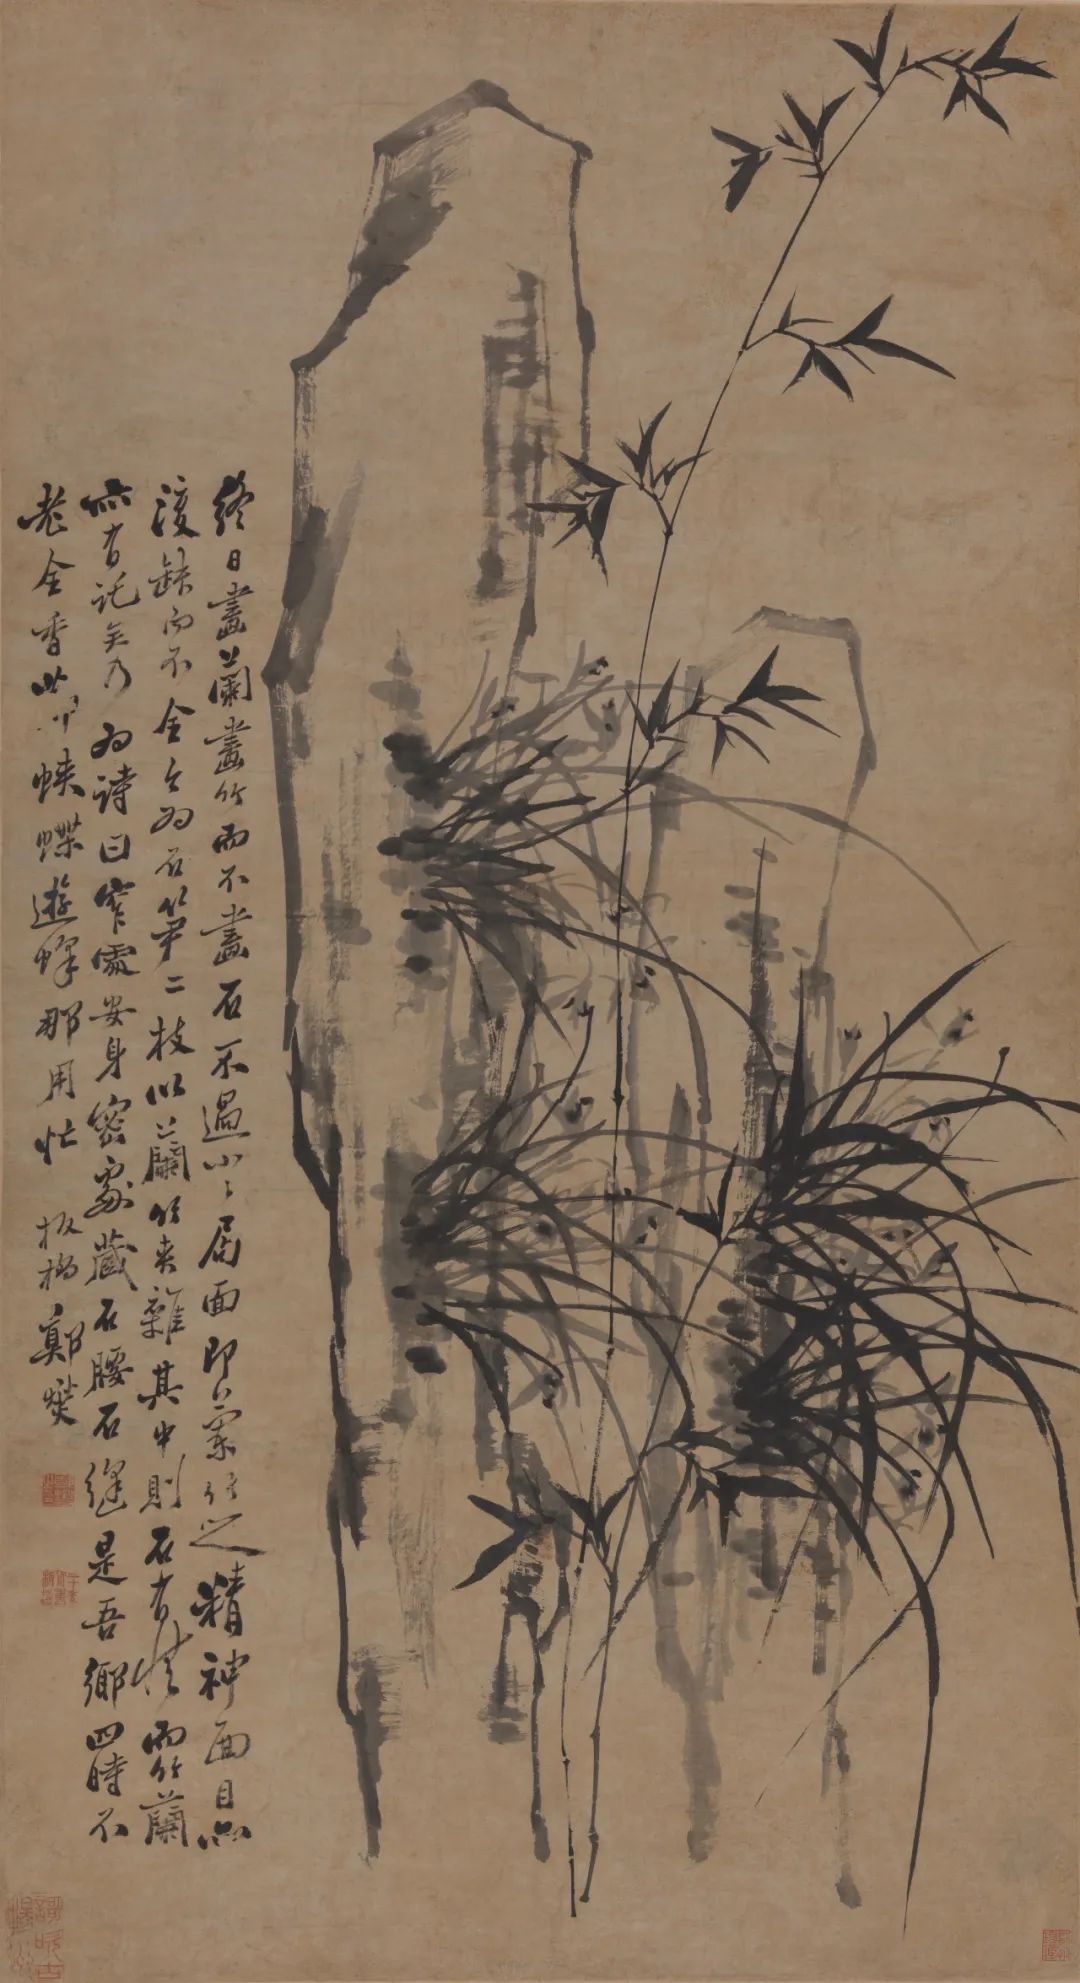 Qing Zheng Xie's "Orchid and Bamboo"